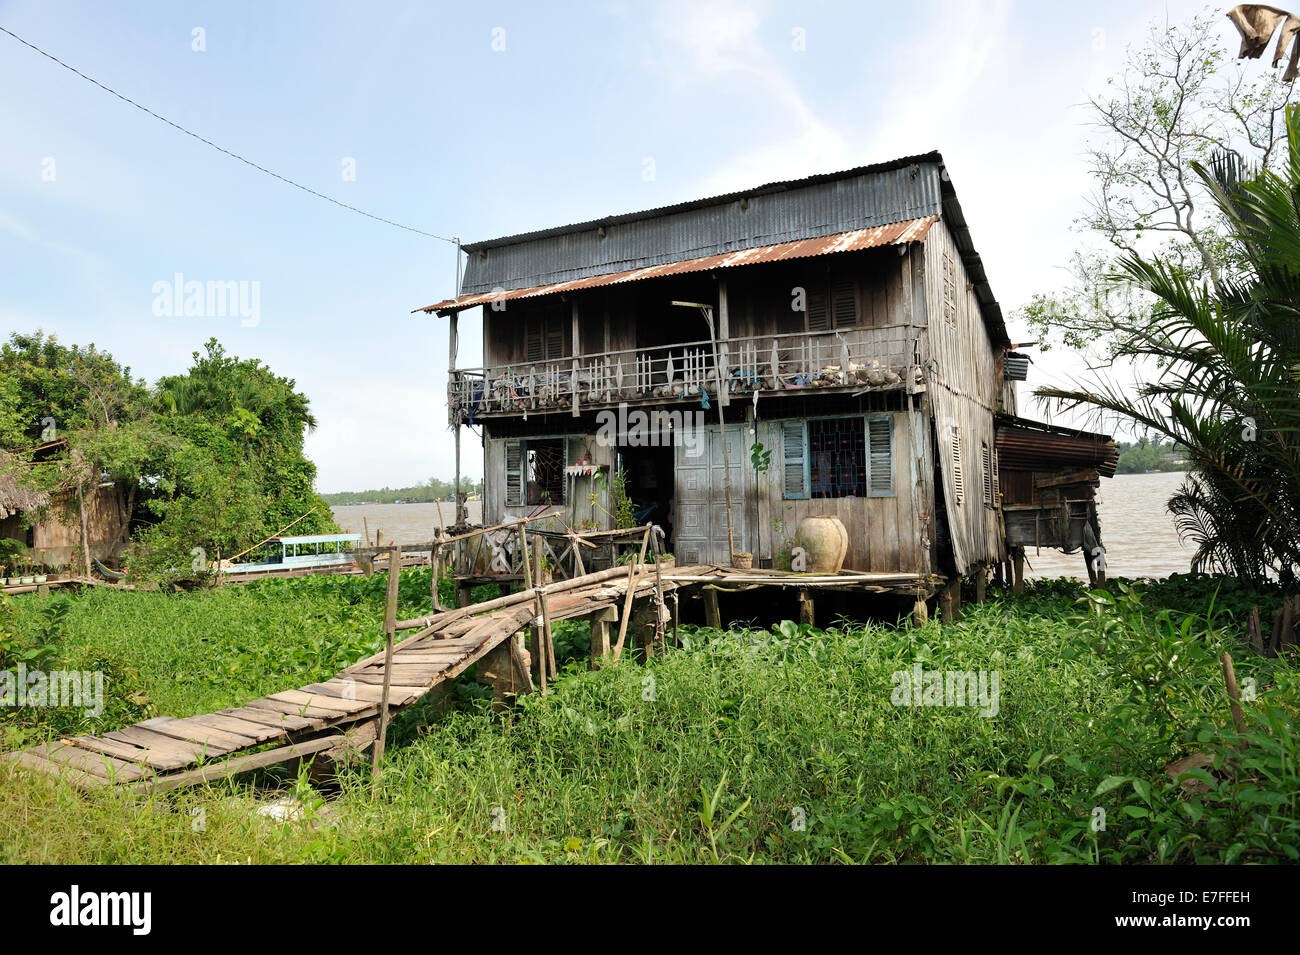 Wooden house on banks of Mekong River, Coconut Island (Con Phung), My Tho, Ben Tre province, Vietnam Stock Photo